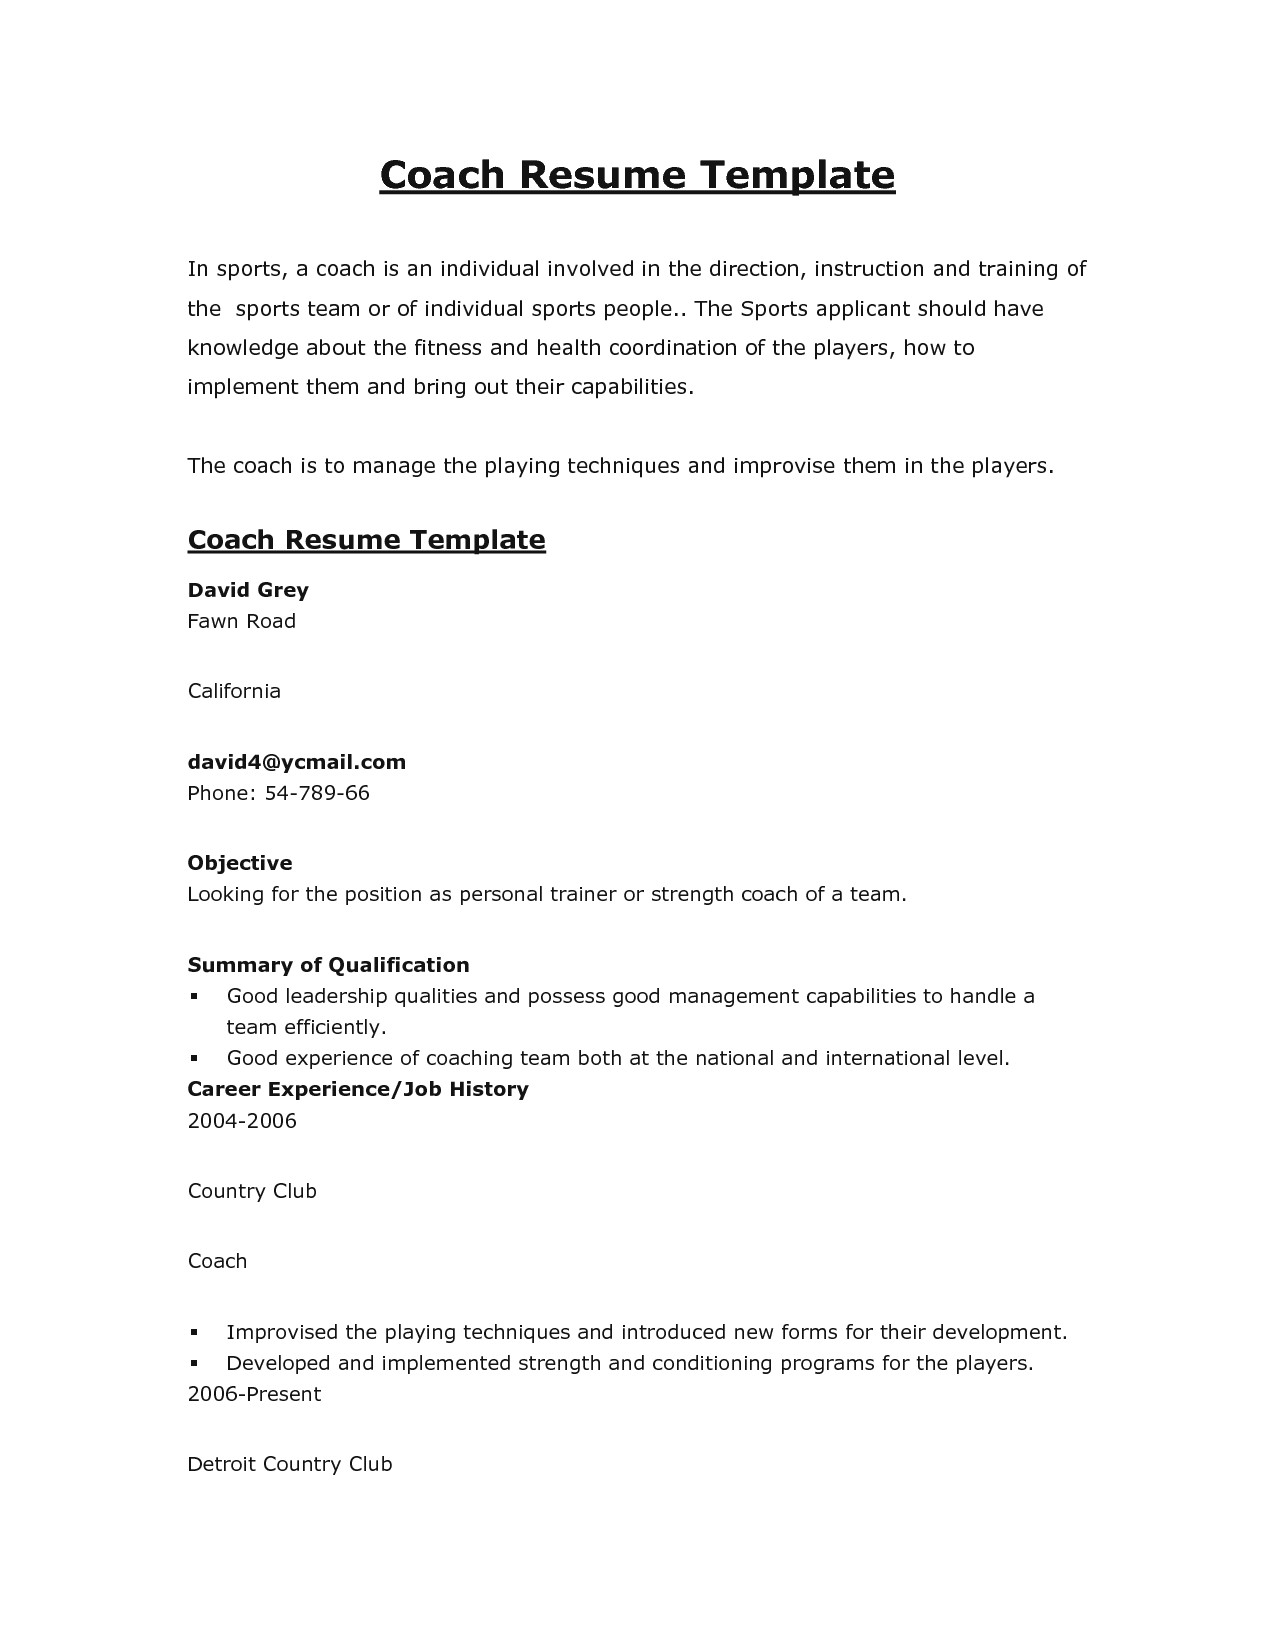 Sports Resume Template athletic Coach Resume Best Letter Sample